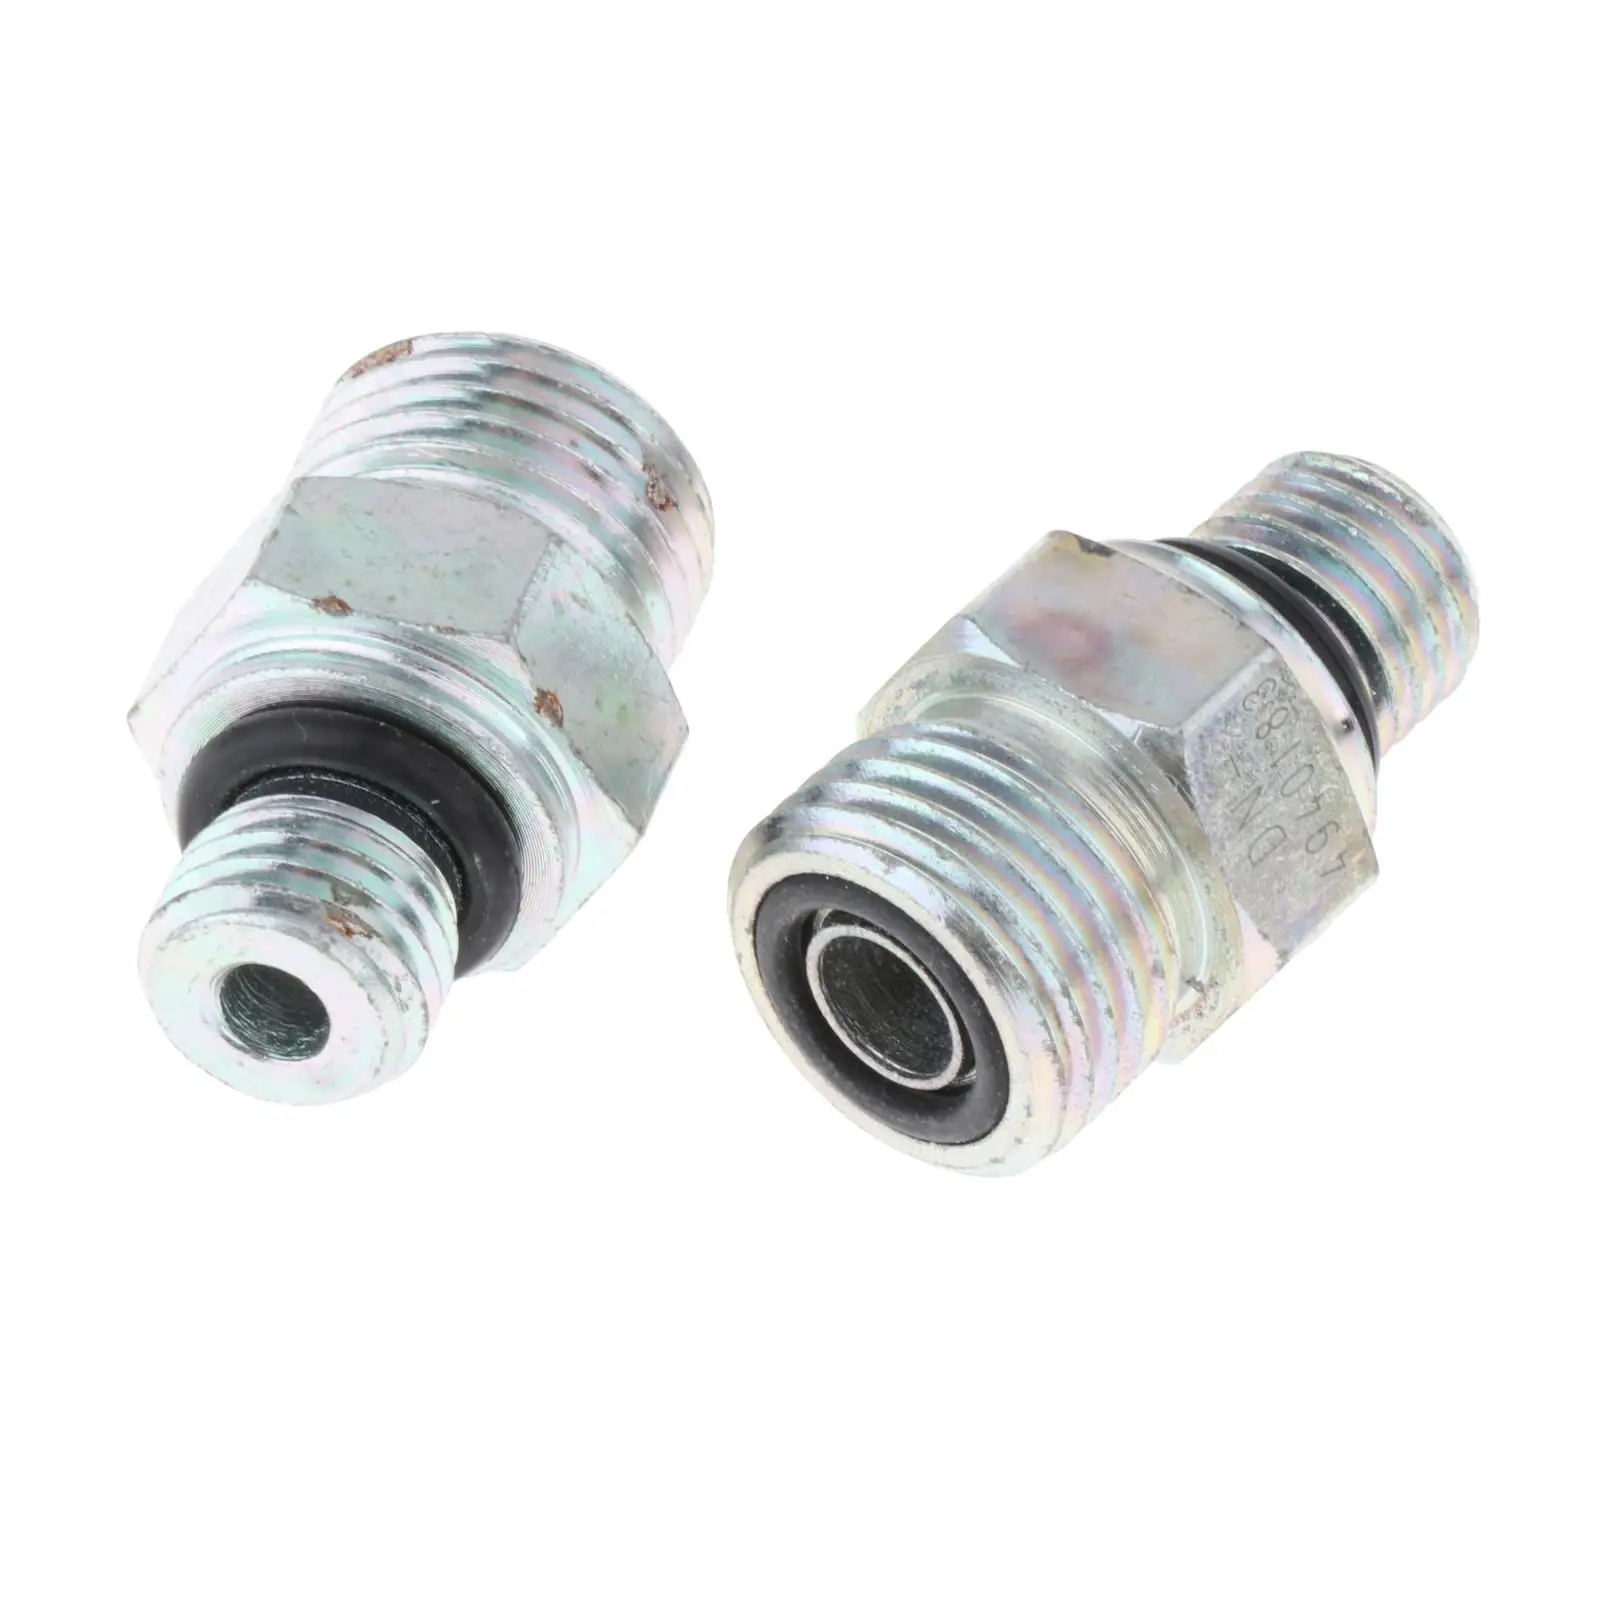 2x Turbo Oil Supply Line Fitting Accessory Hardware Connectors Joints for Auto